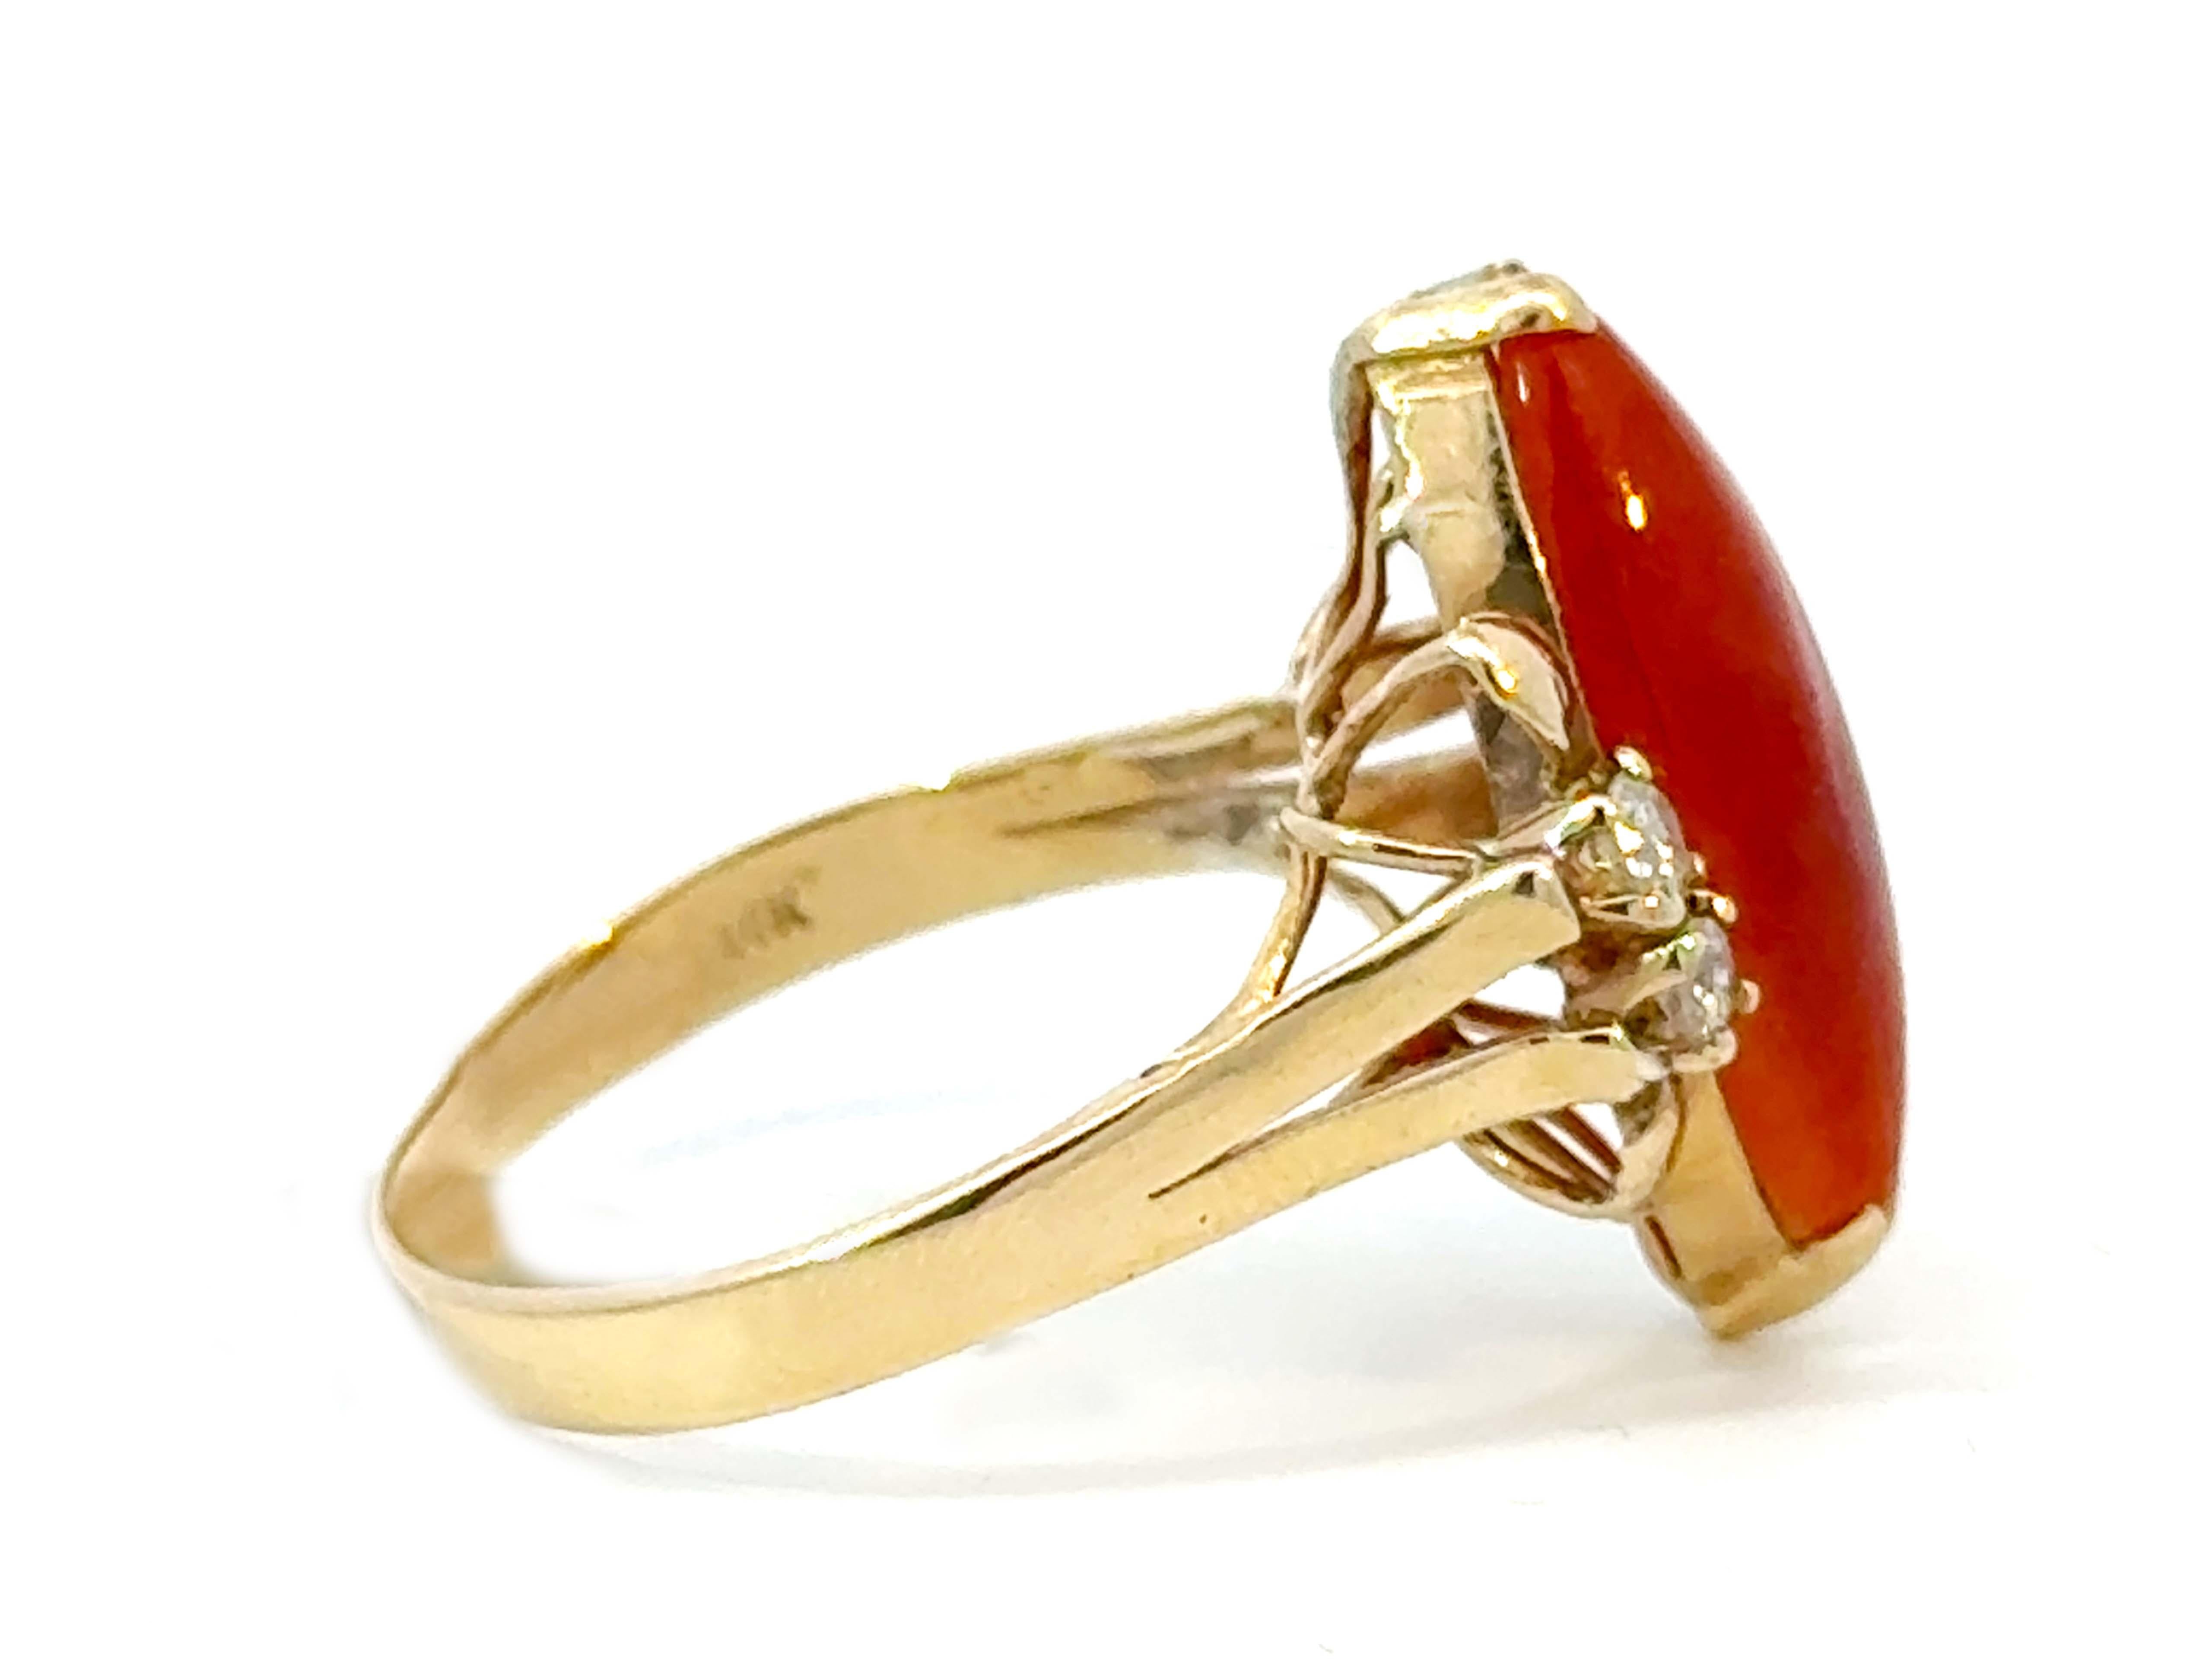 Marquise Red Jade Diamond Ring 14k Yellow Gold In Excellent Condition For Sale In Honolulu, HI